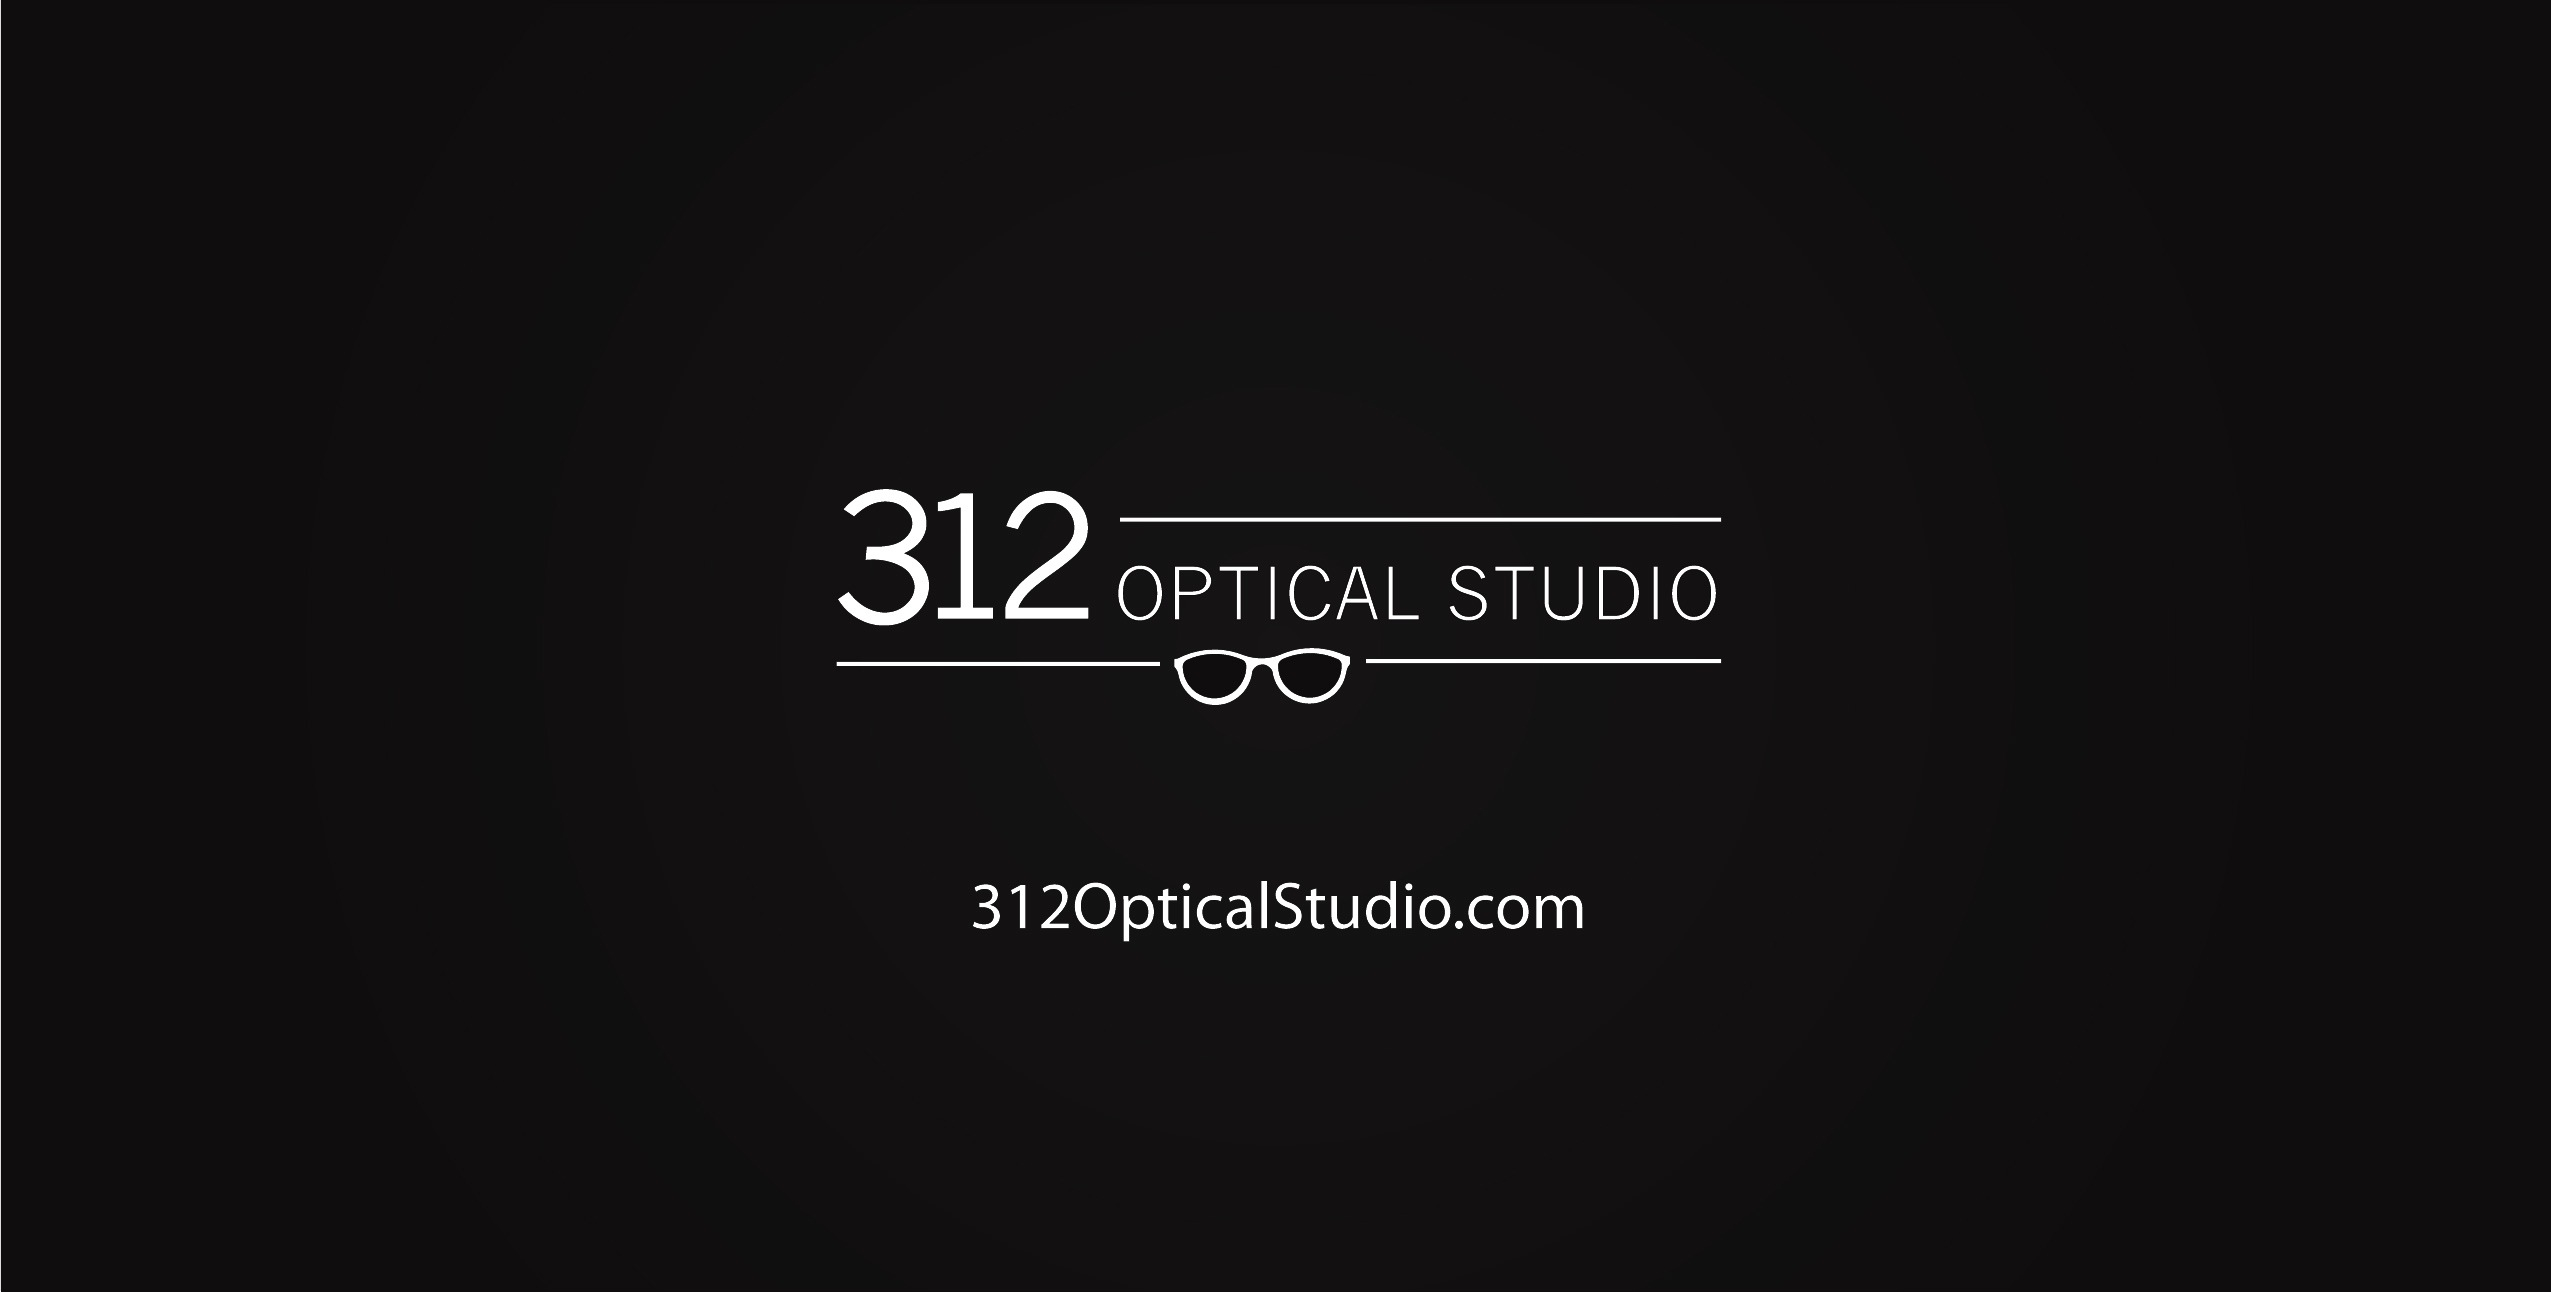 Local eyewear shop, 312 Optical Studio, turns 10…with 10-year-old prices